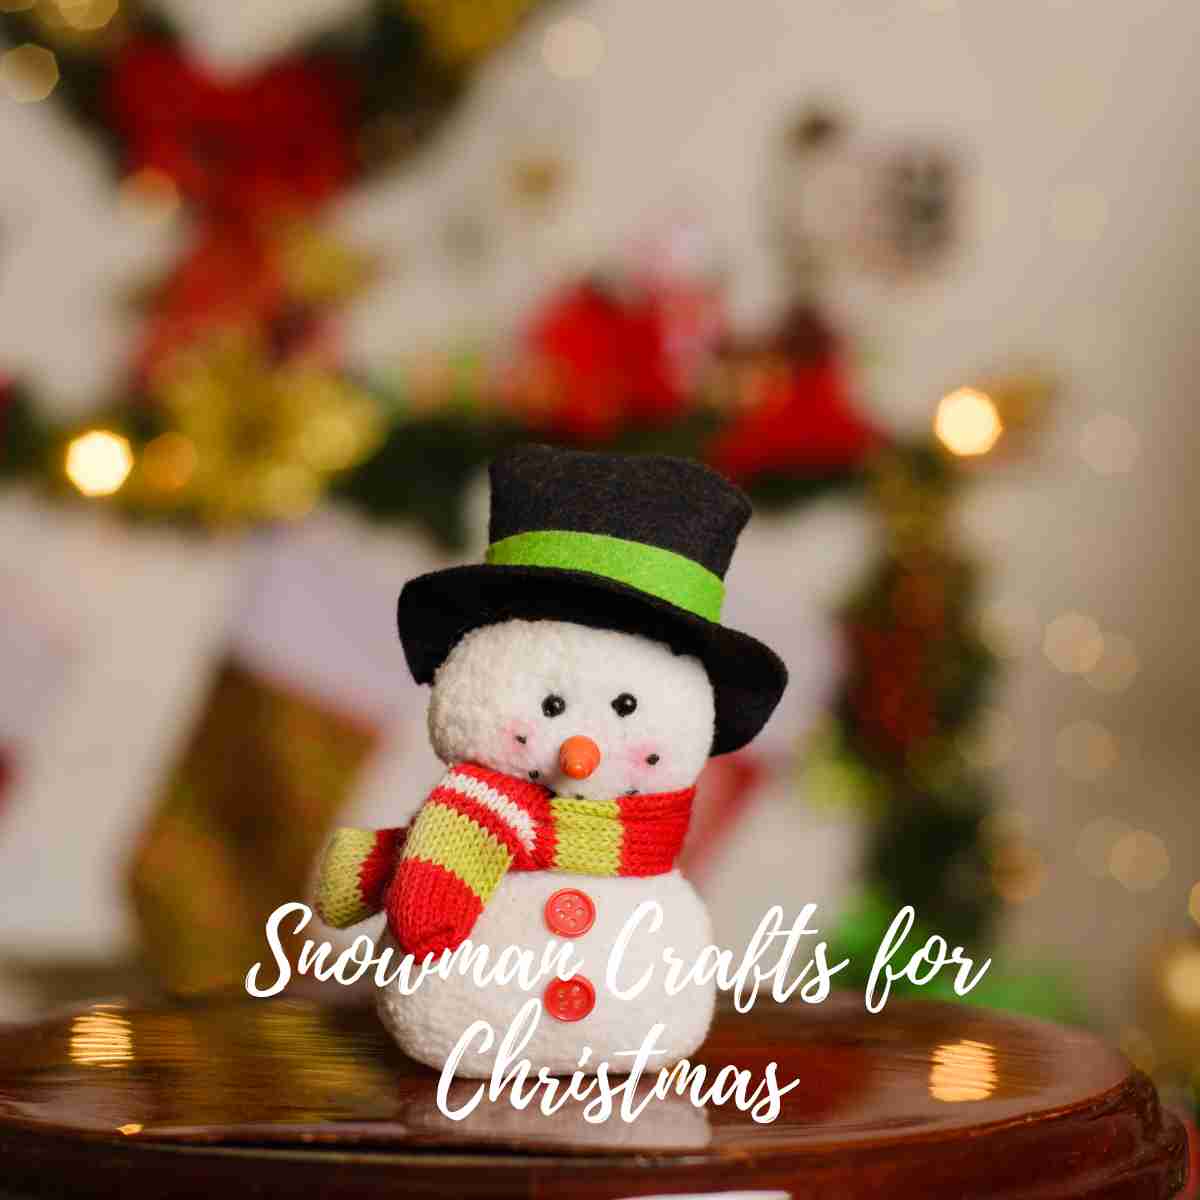 Snowman Crafts for Christmas